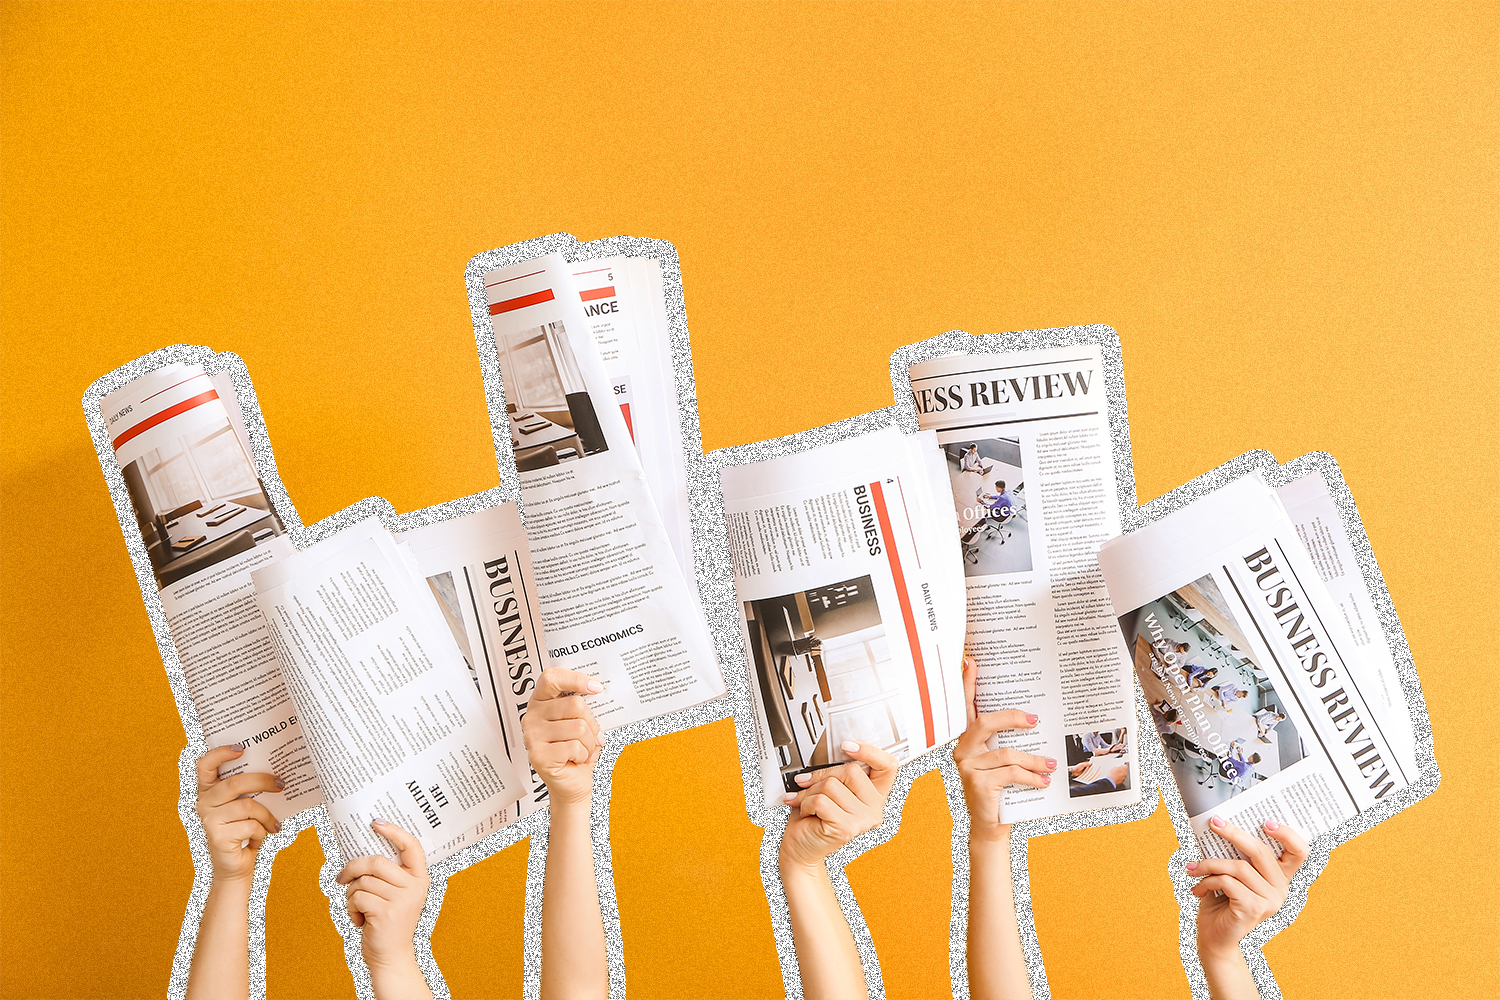 hands holding up newspapers